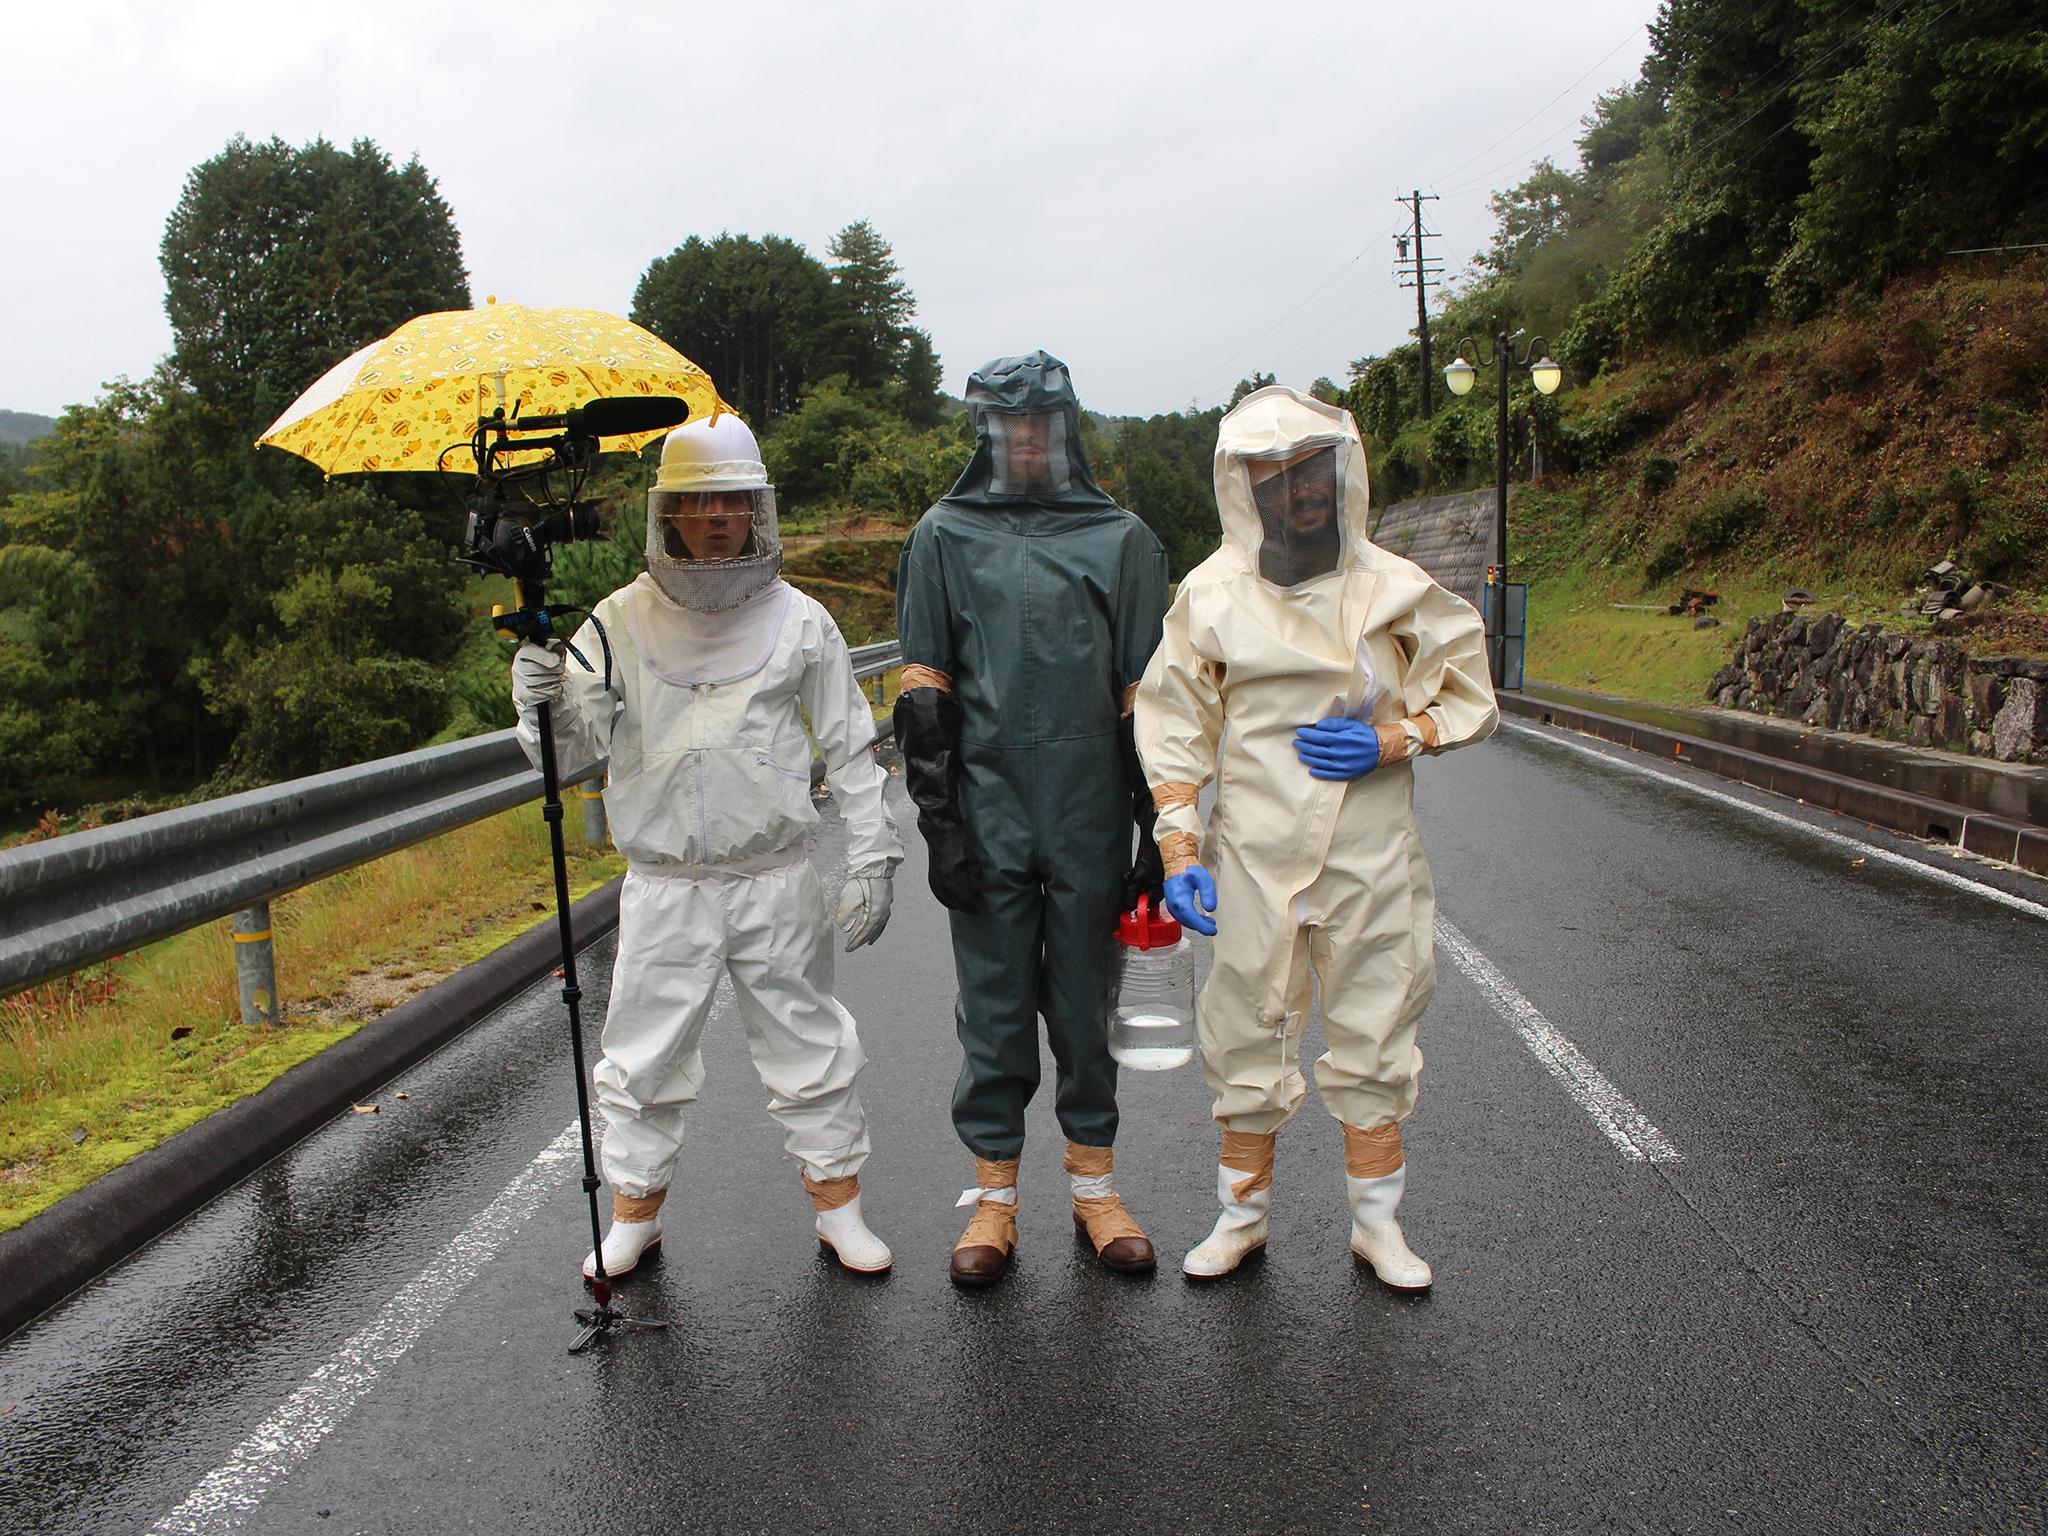 Roberto Flore and his team in Japan before hunting for giant hornets